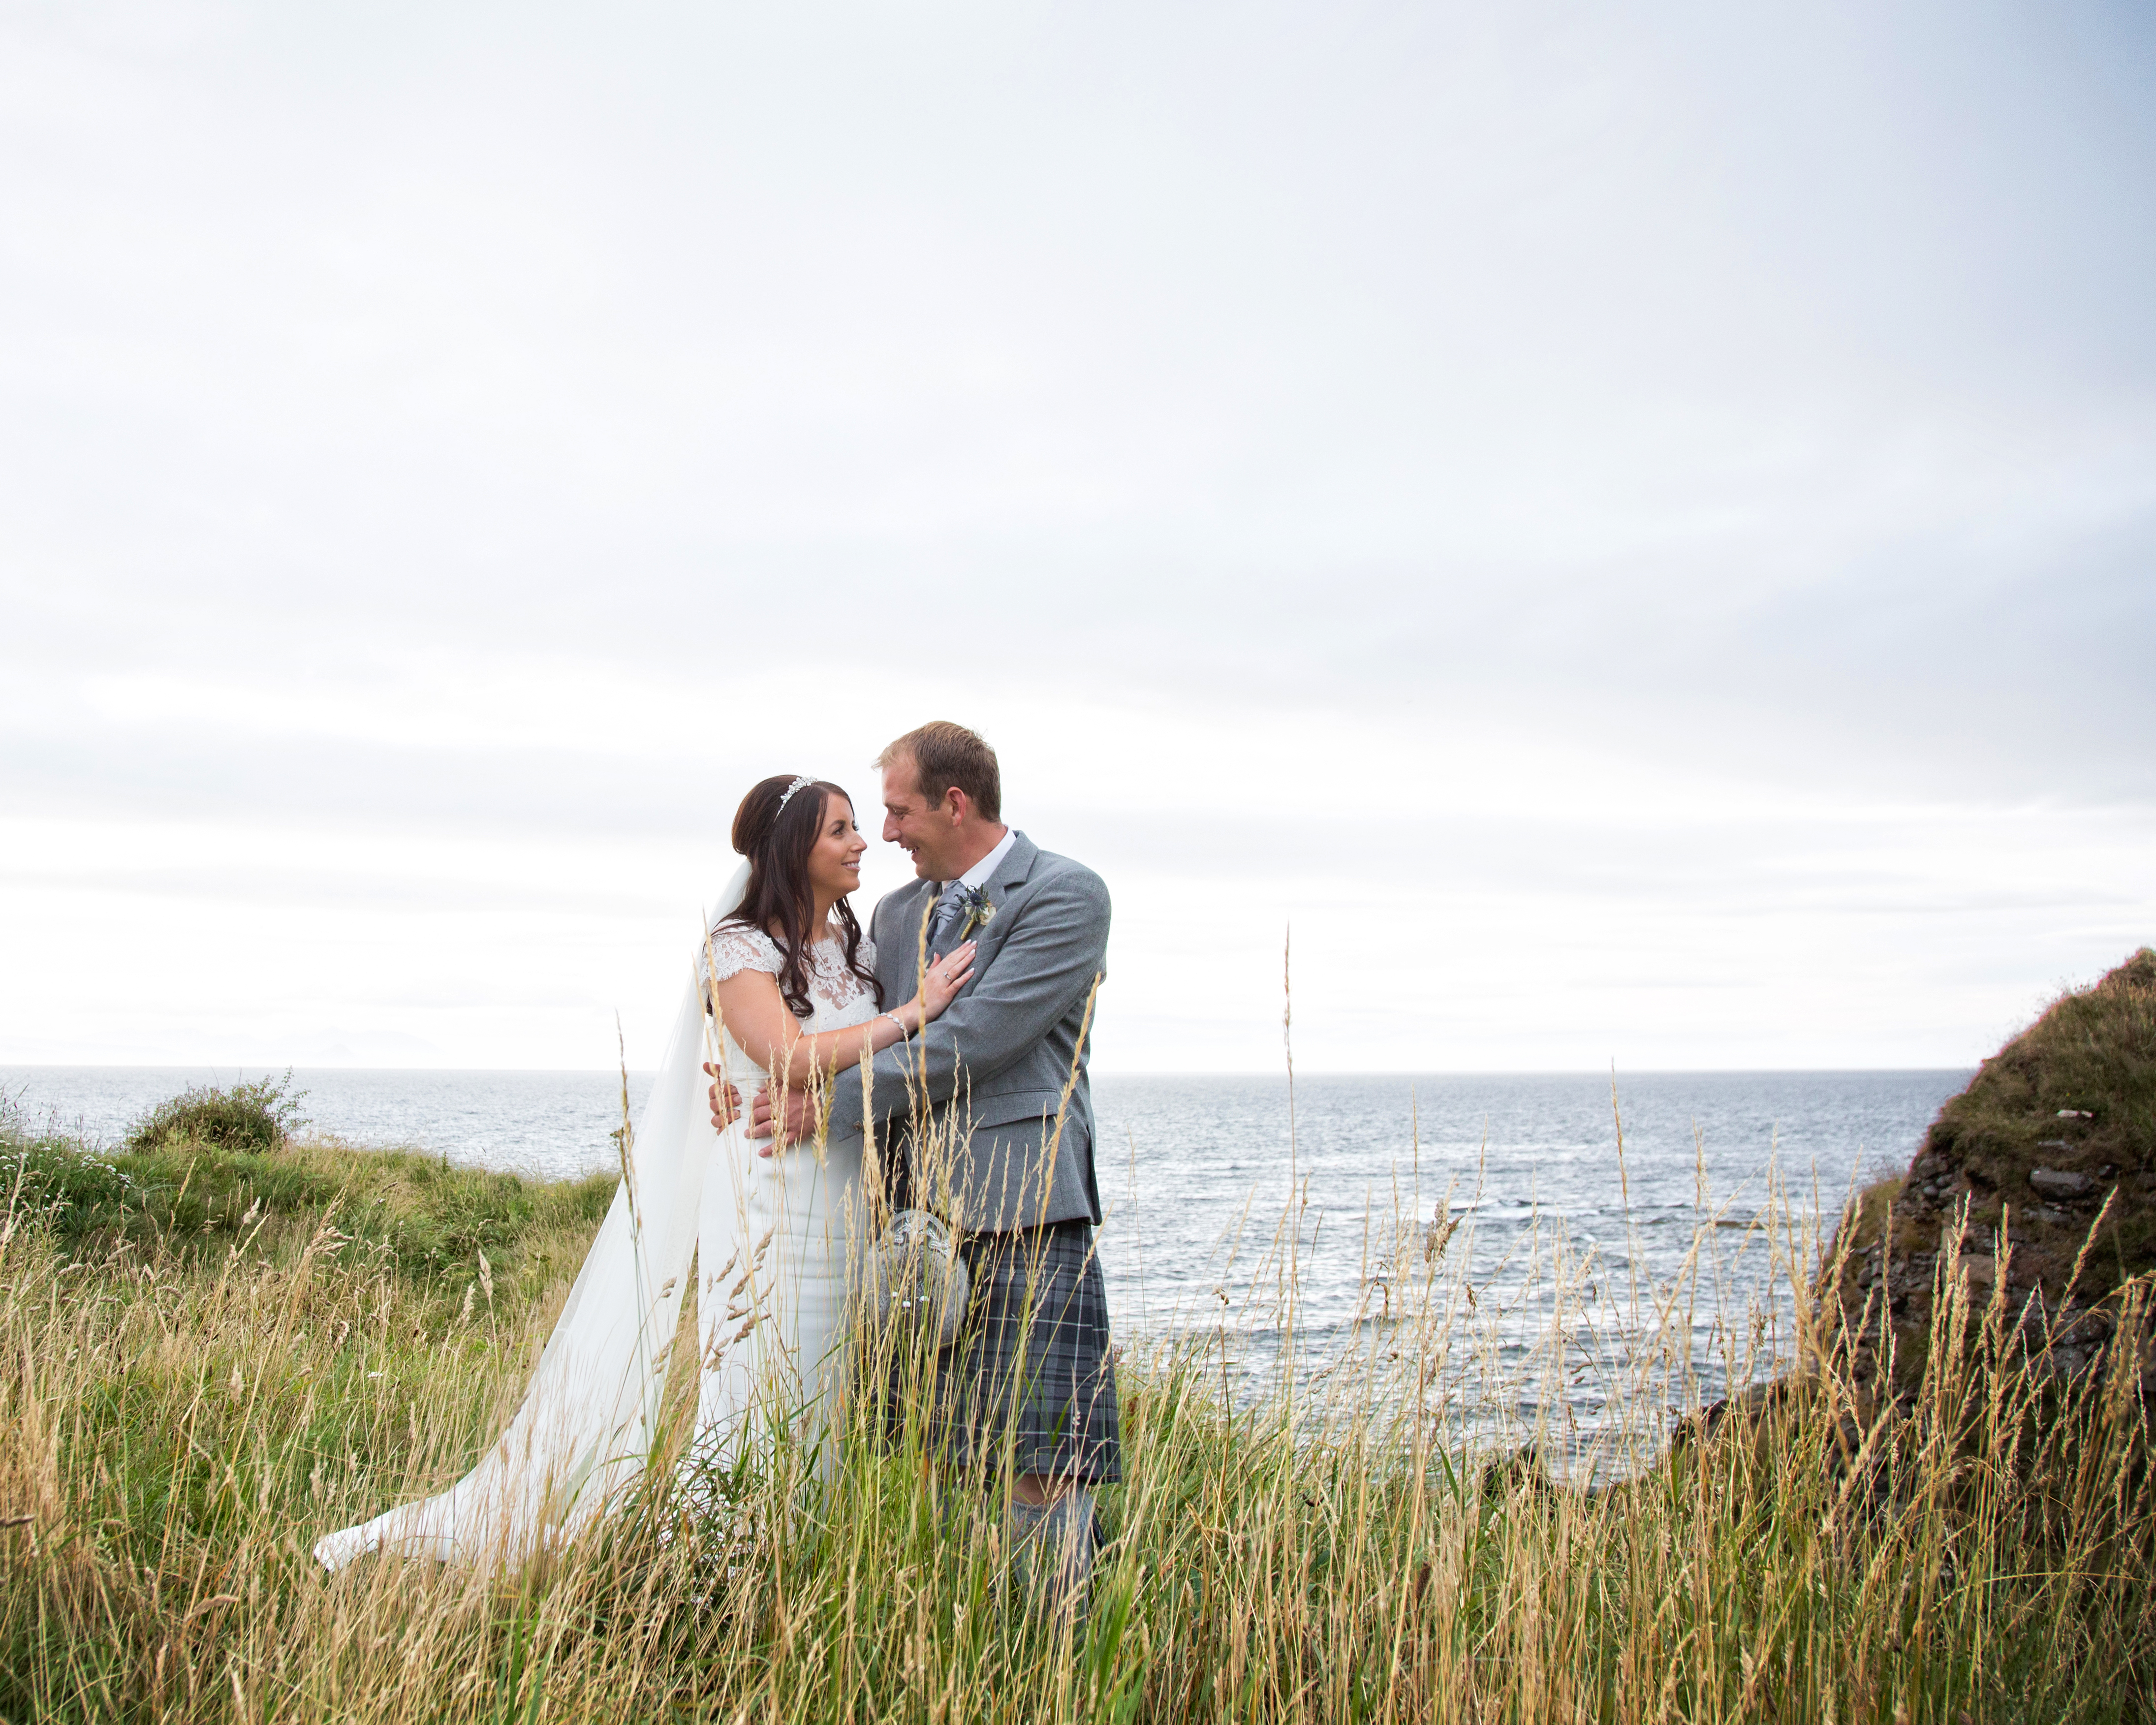 A delighted couple celebrate their marriage in the ground of Trump Turnberry